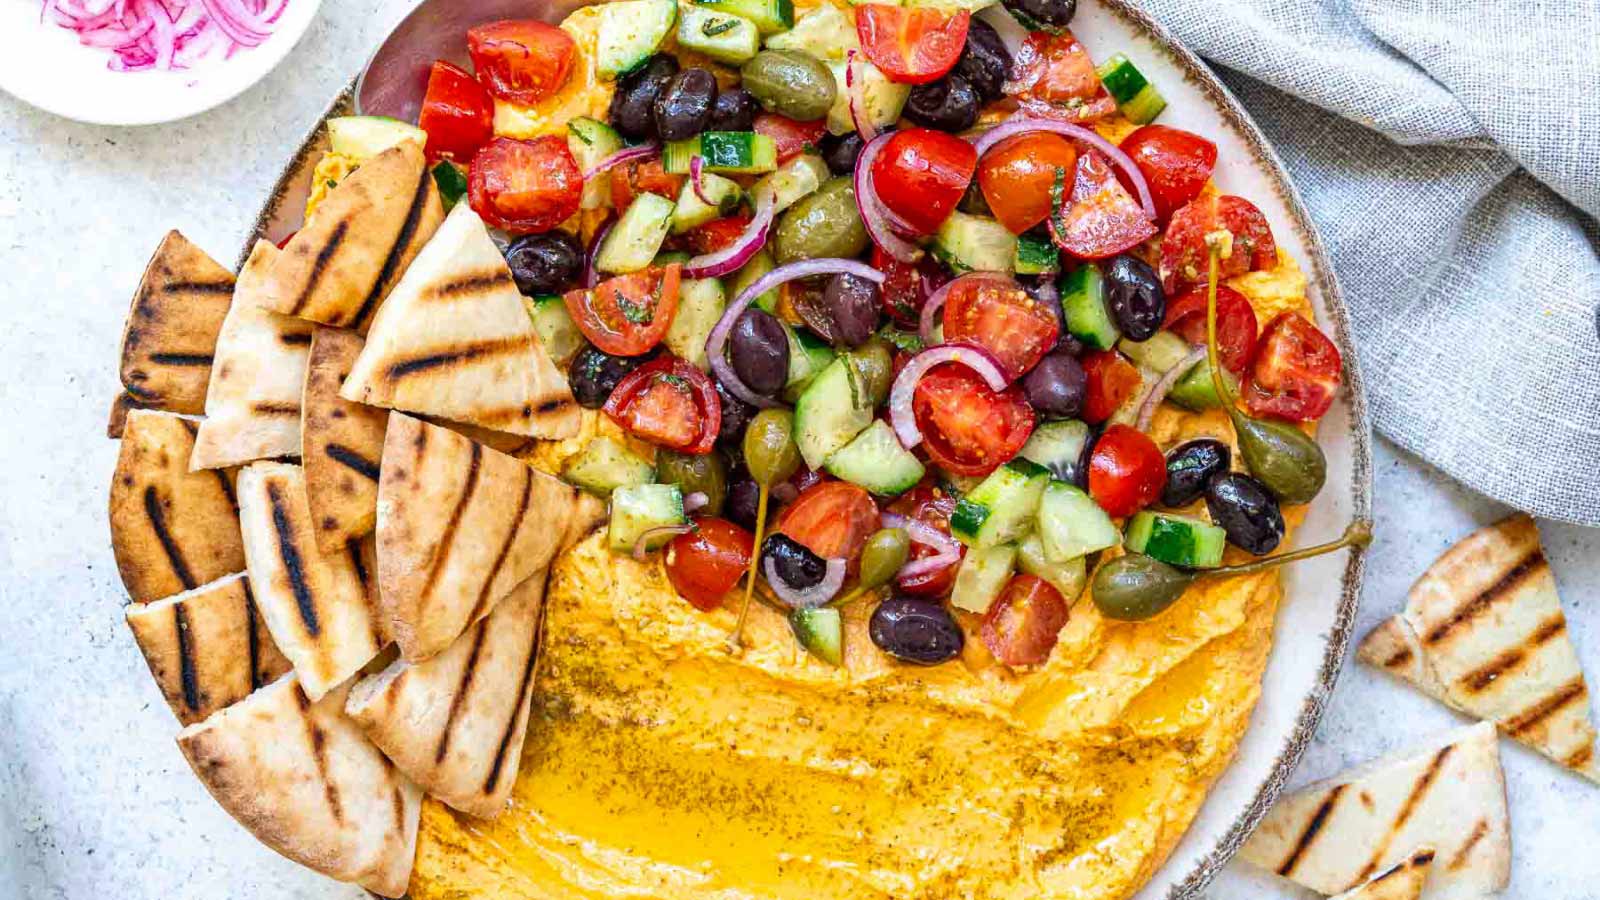 An overhead view of a bowl of hummus loaded with fresh toppings like tomatoes, olives, cucumbers, and pita chips.